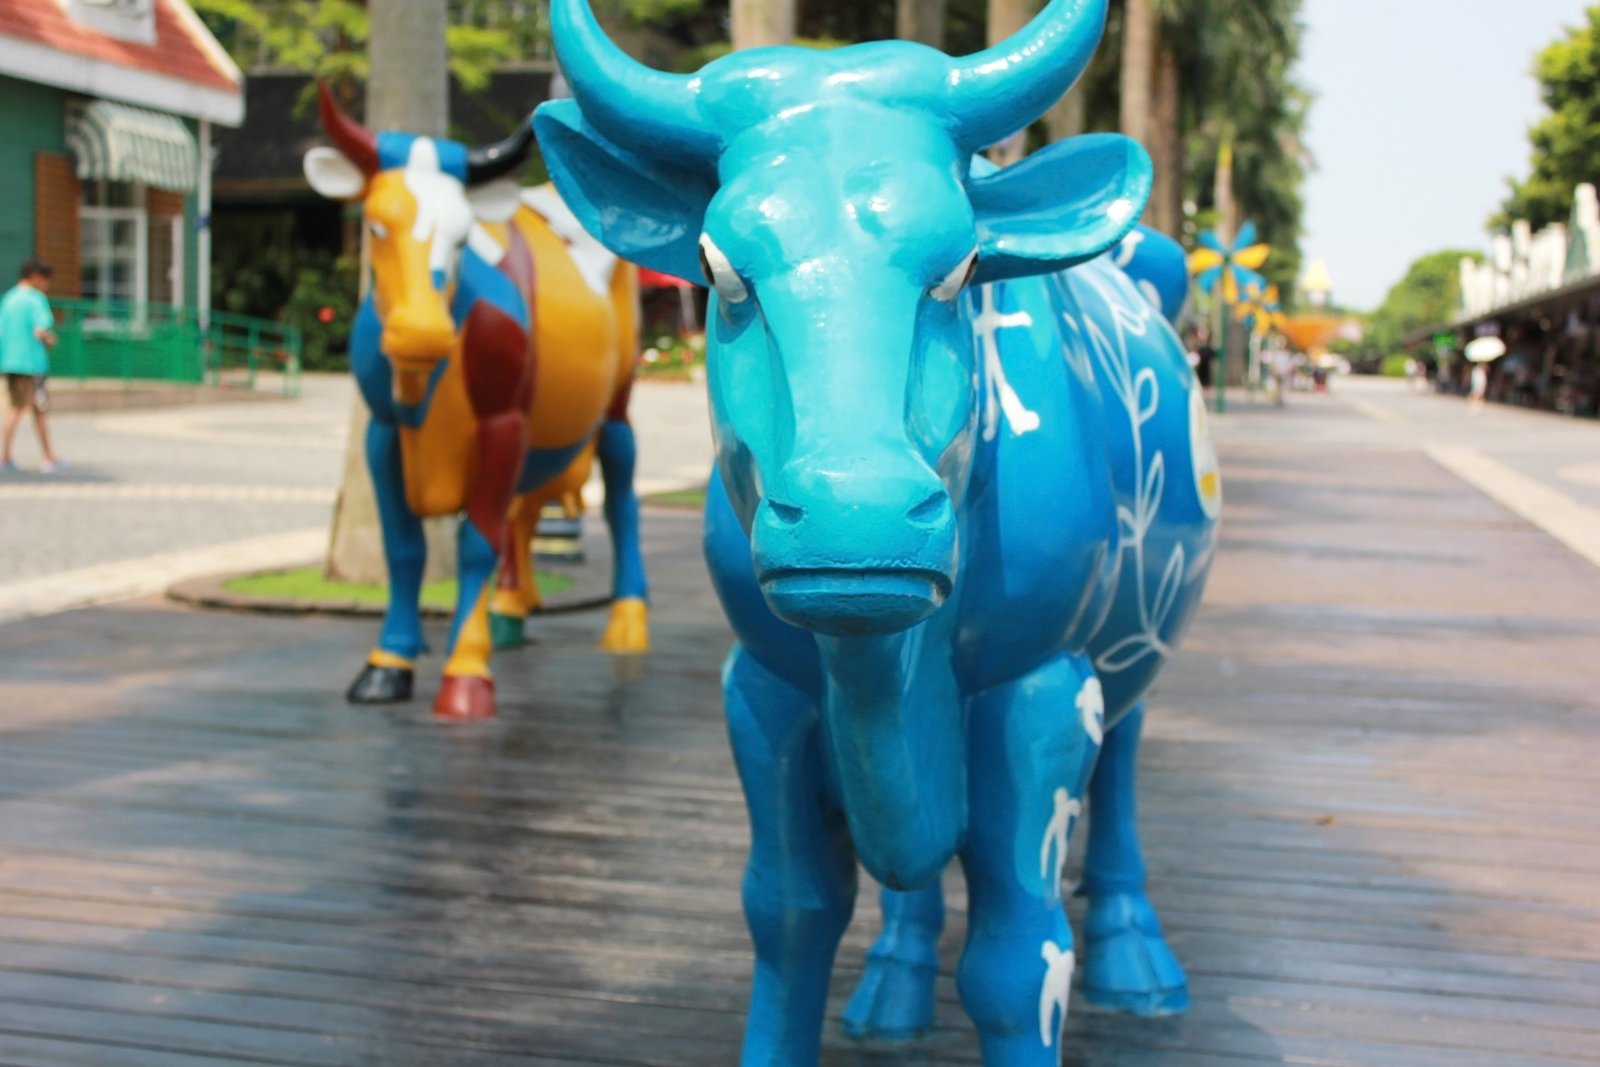 Sculpture-colored cattle